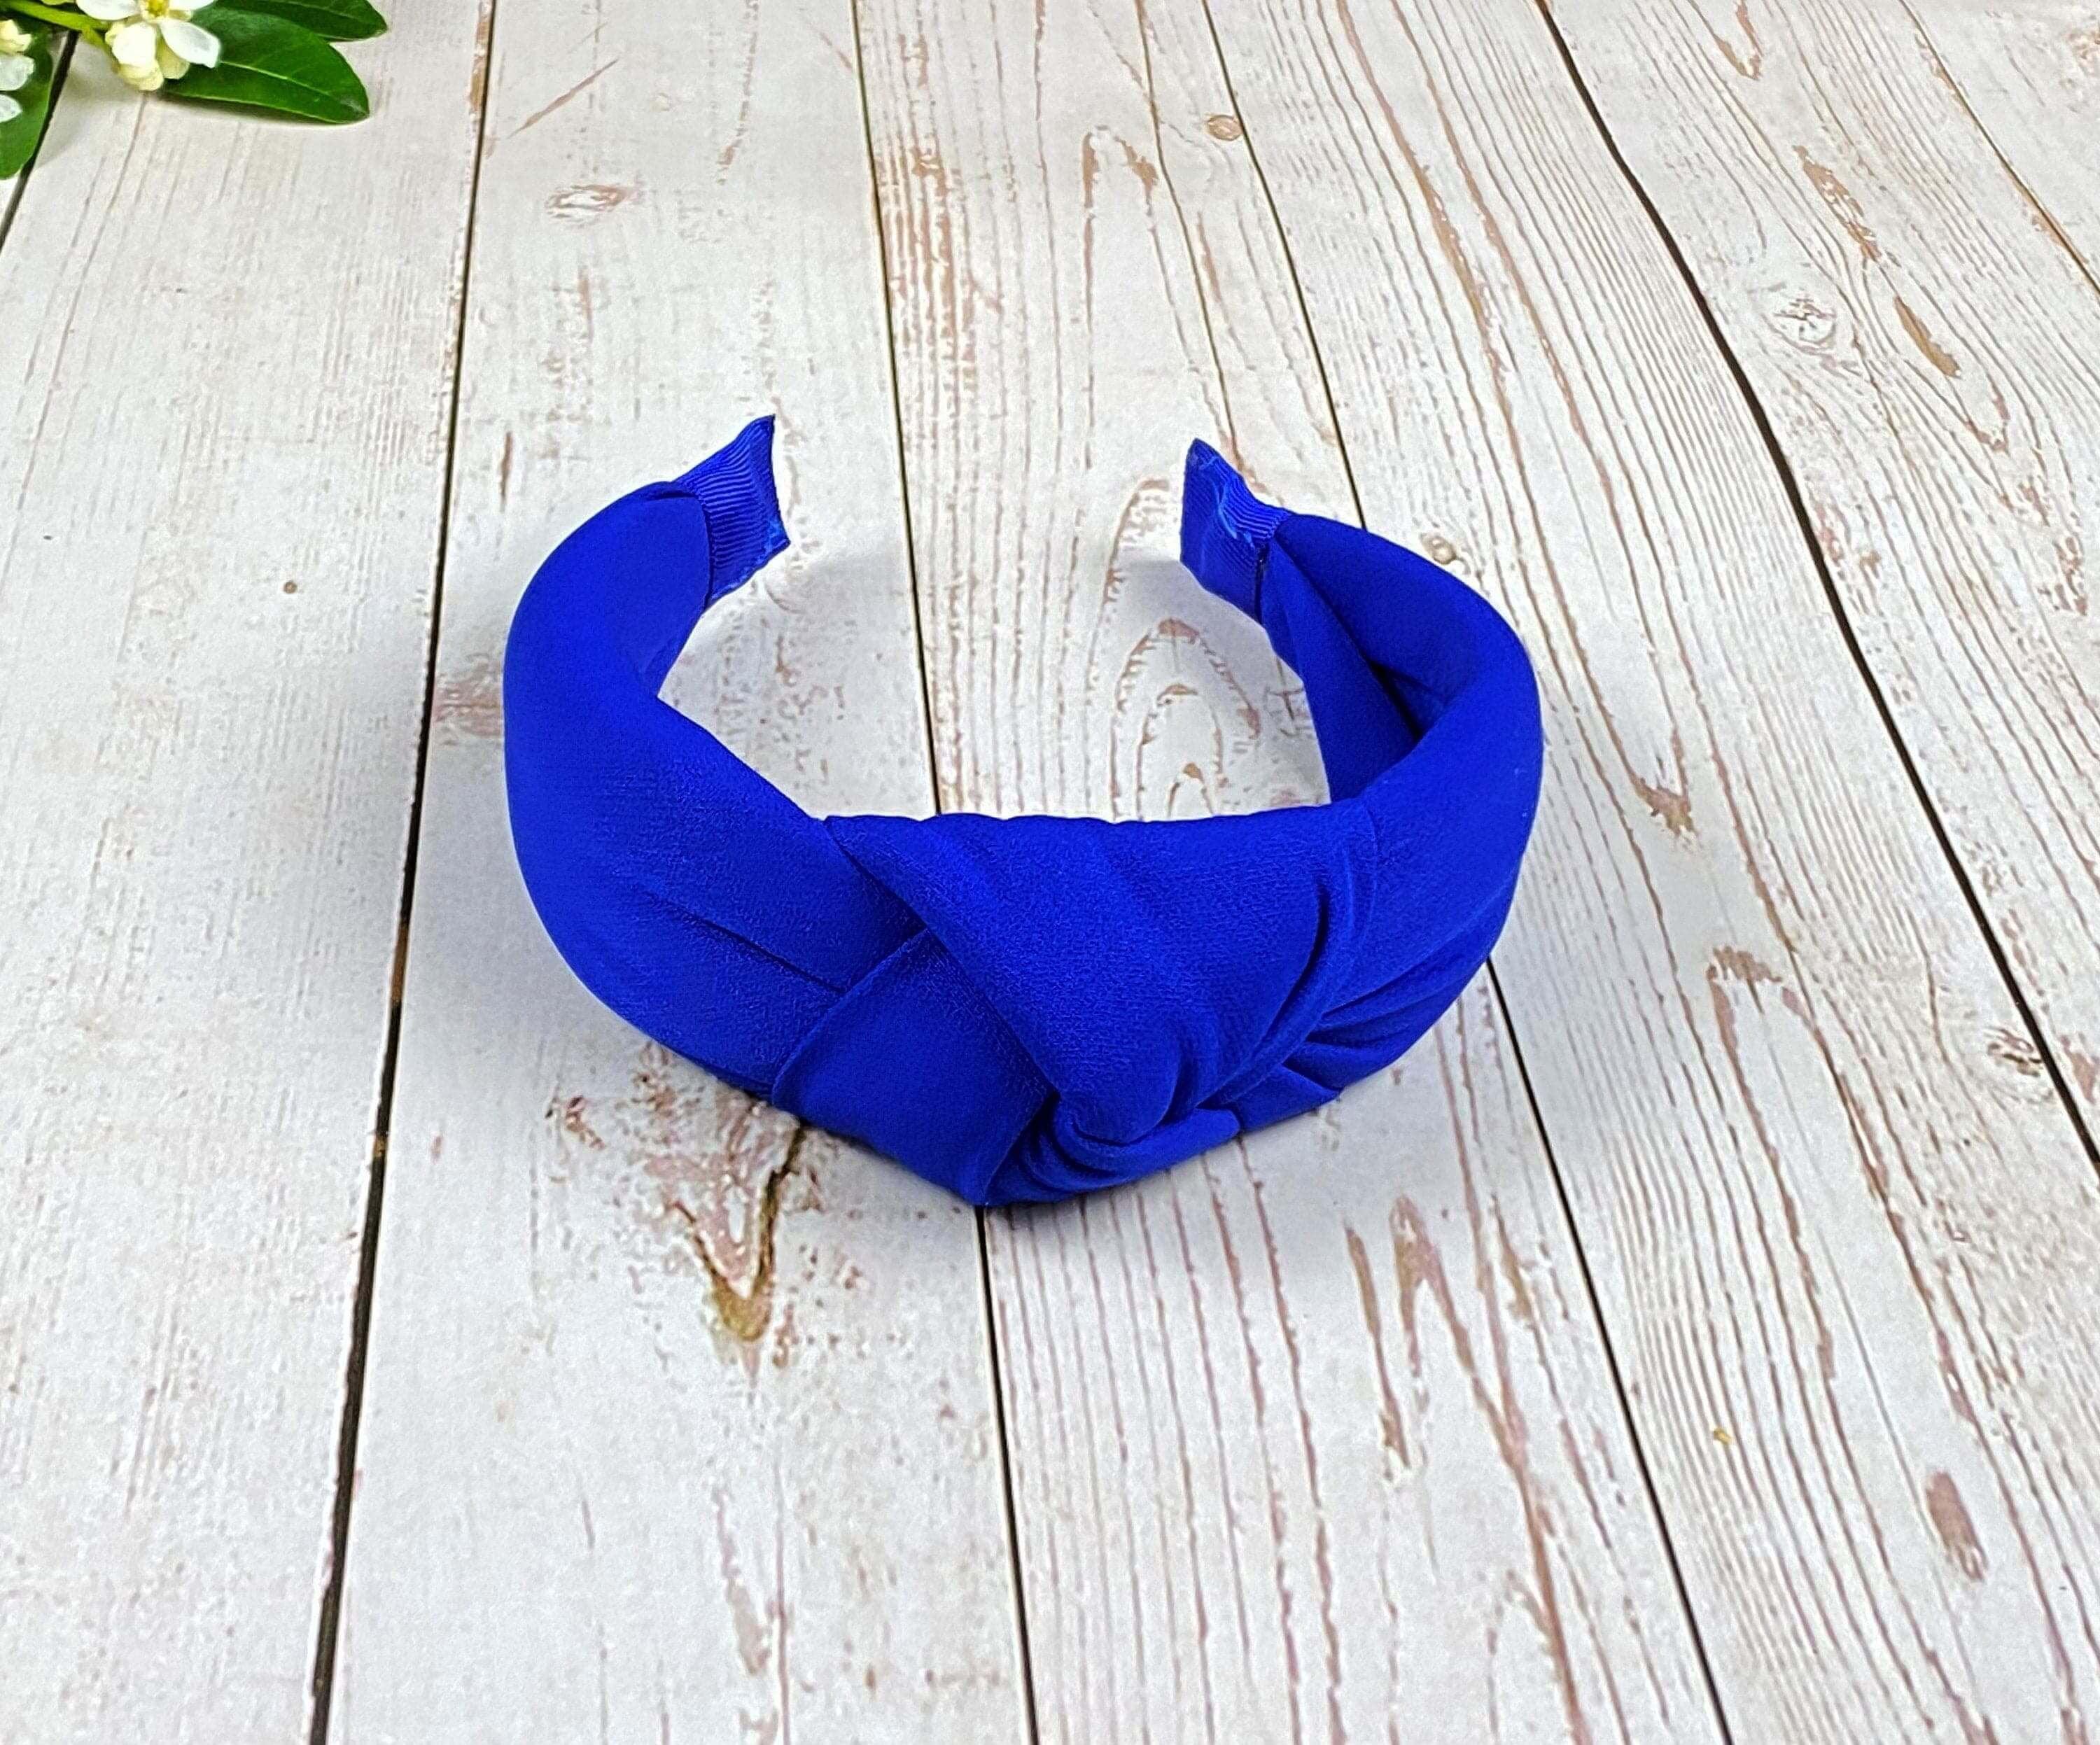 High-Quality Parliament Blue Twist Knot Headband, Women Classic Headband, Blue Elegant Headband, Fashionable Hairband, Viscose Crepe Padded Hairband available at Moyoni Design